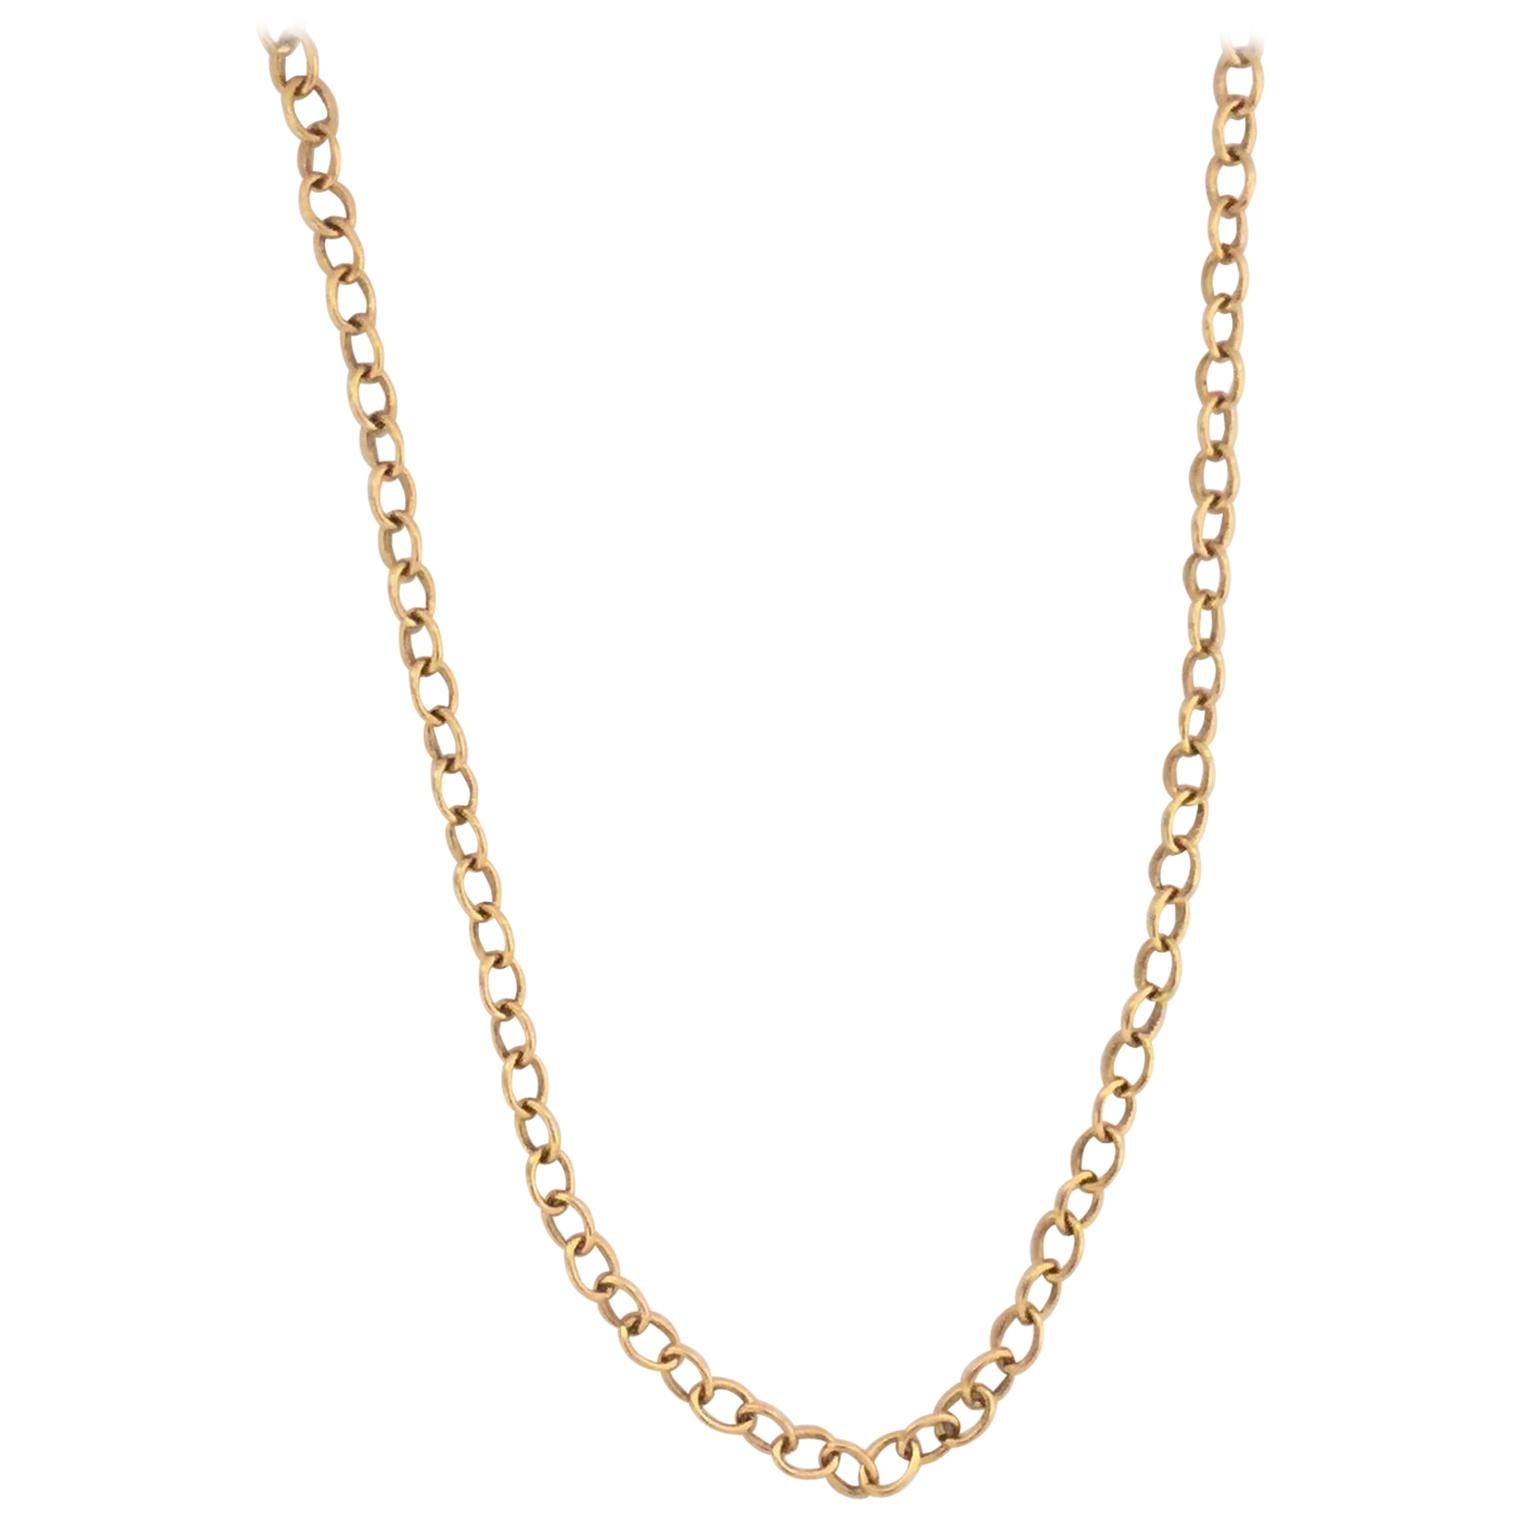 Faberge Gold Chain F2049